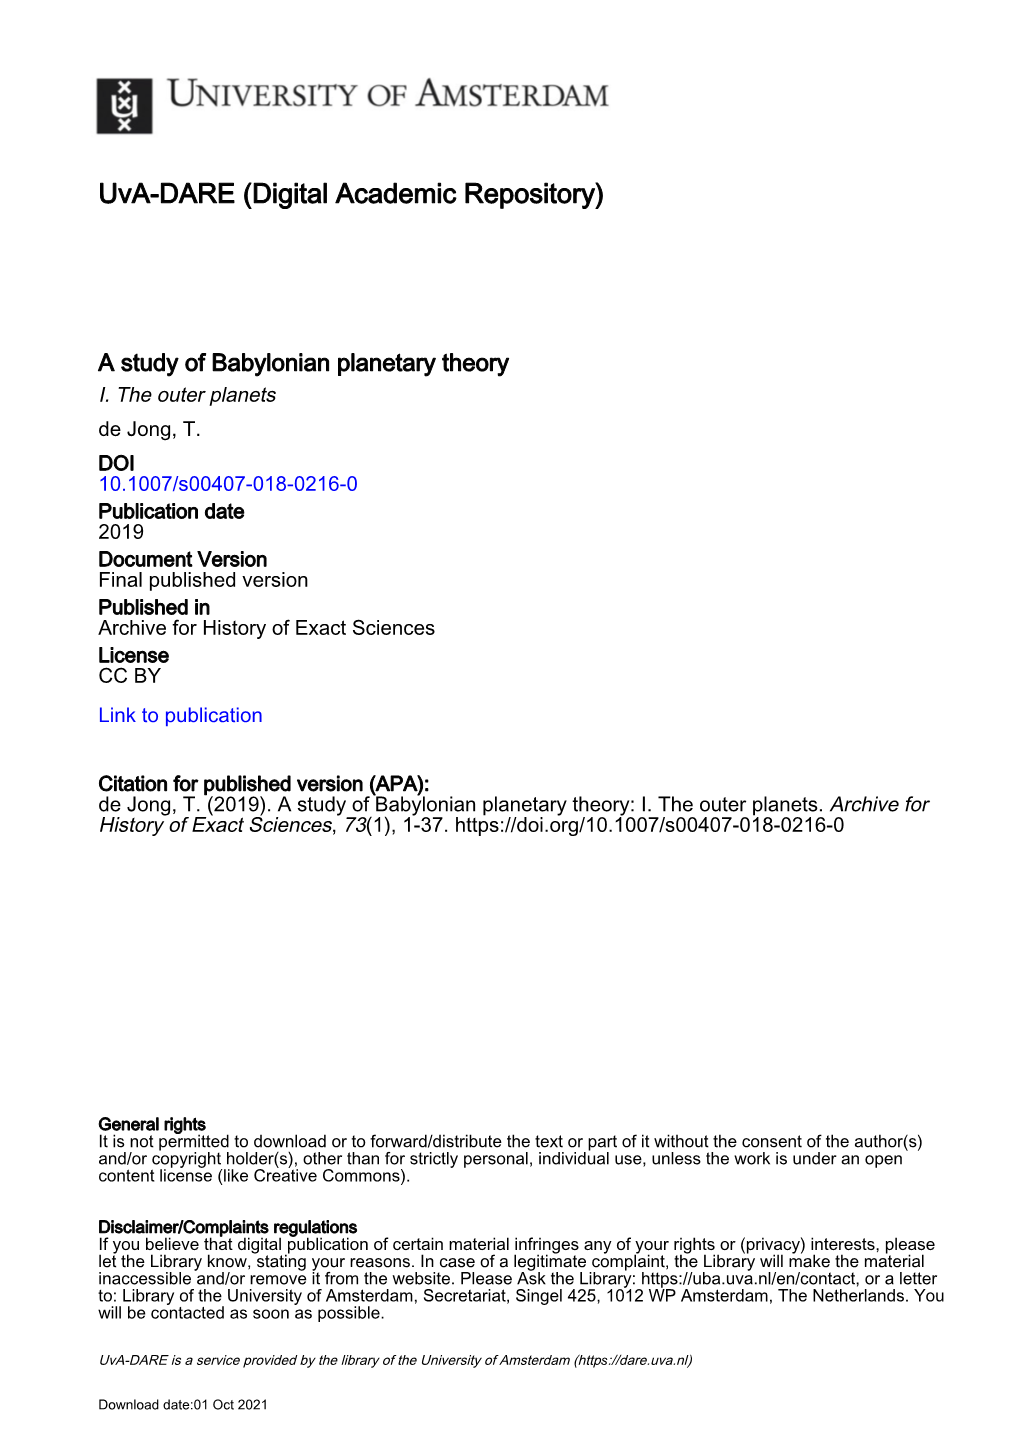 A Study of Babylonian Planetary Theory I. the Outer Planets De Jong, T